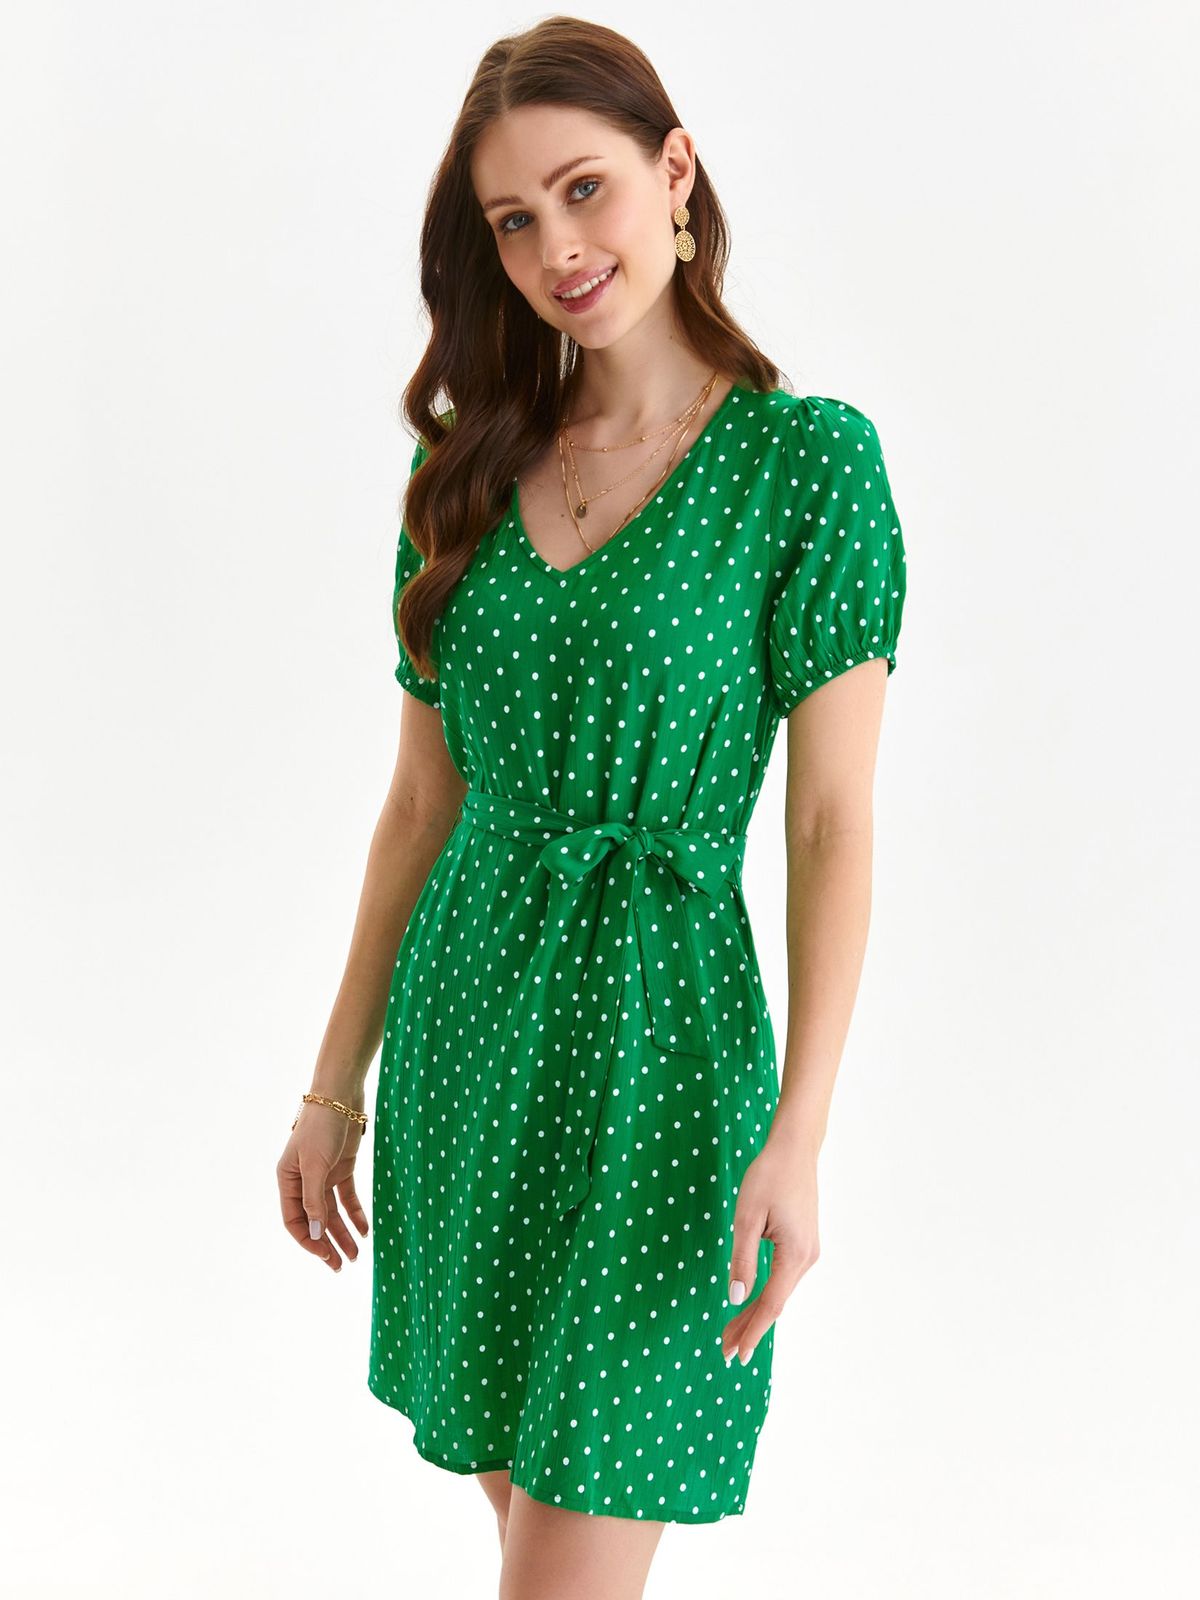 Green dress thin fabric short cut loose fit accessorized with tied waistband with puffed sleeves 1 - StarShinerS.com